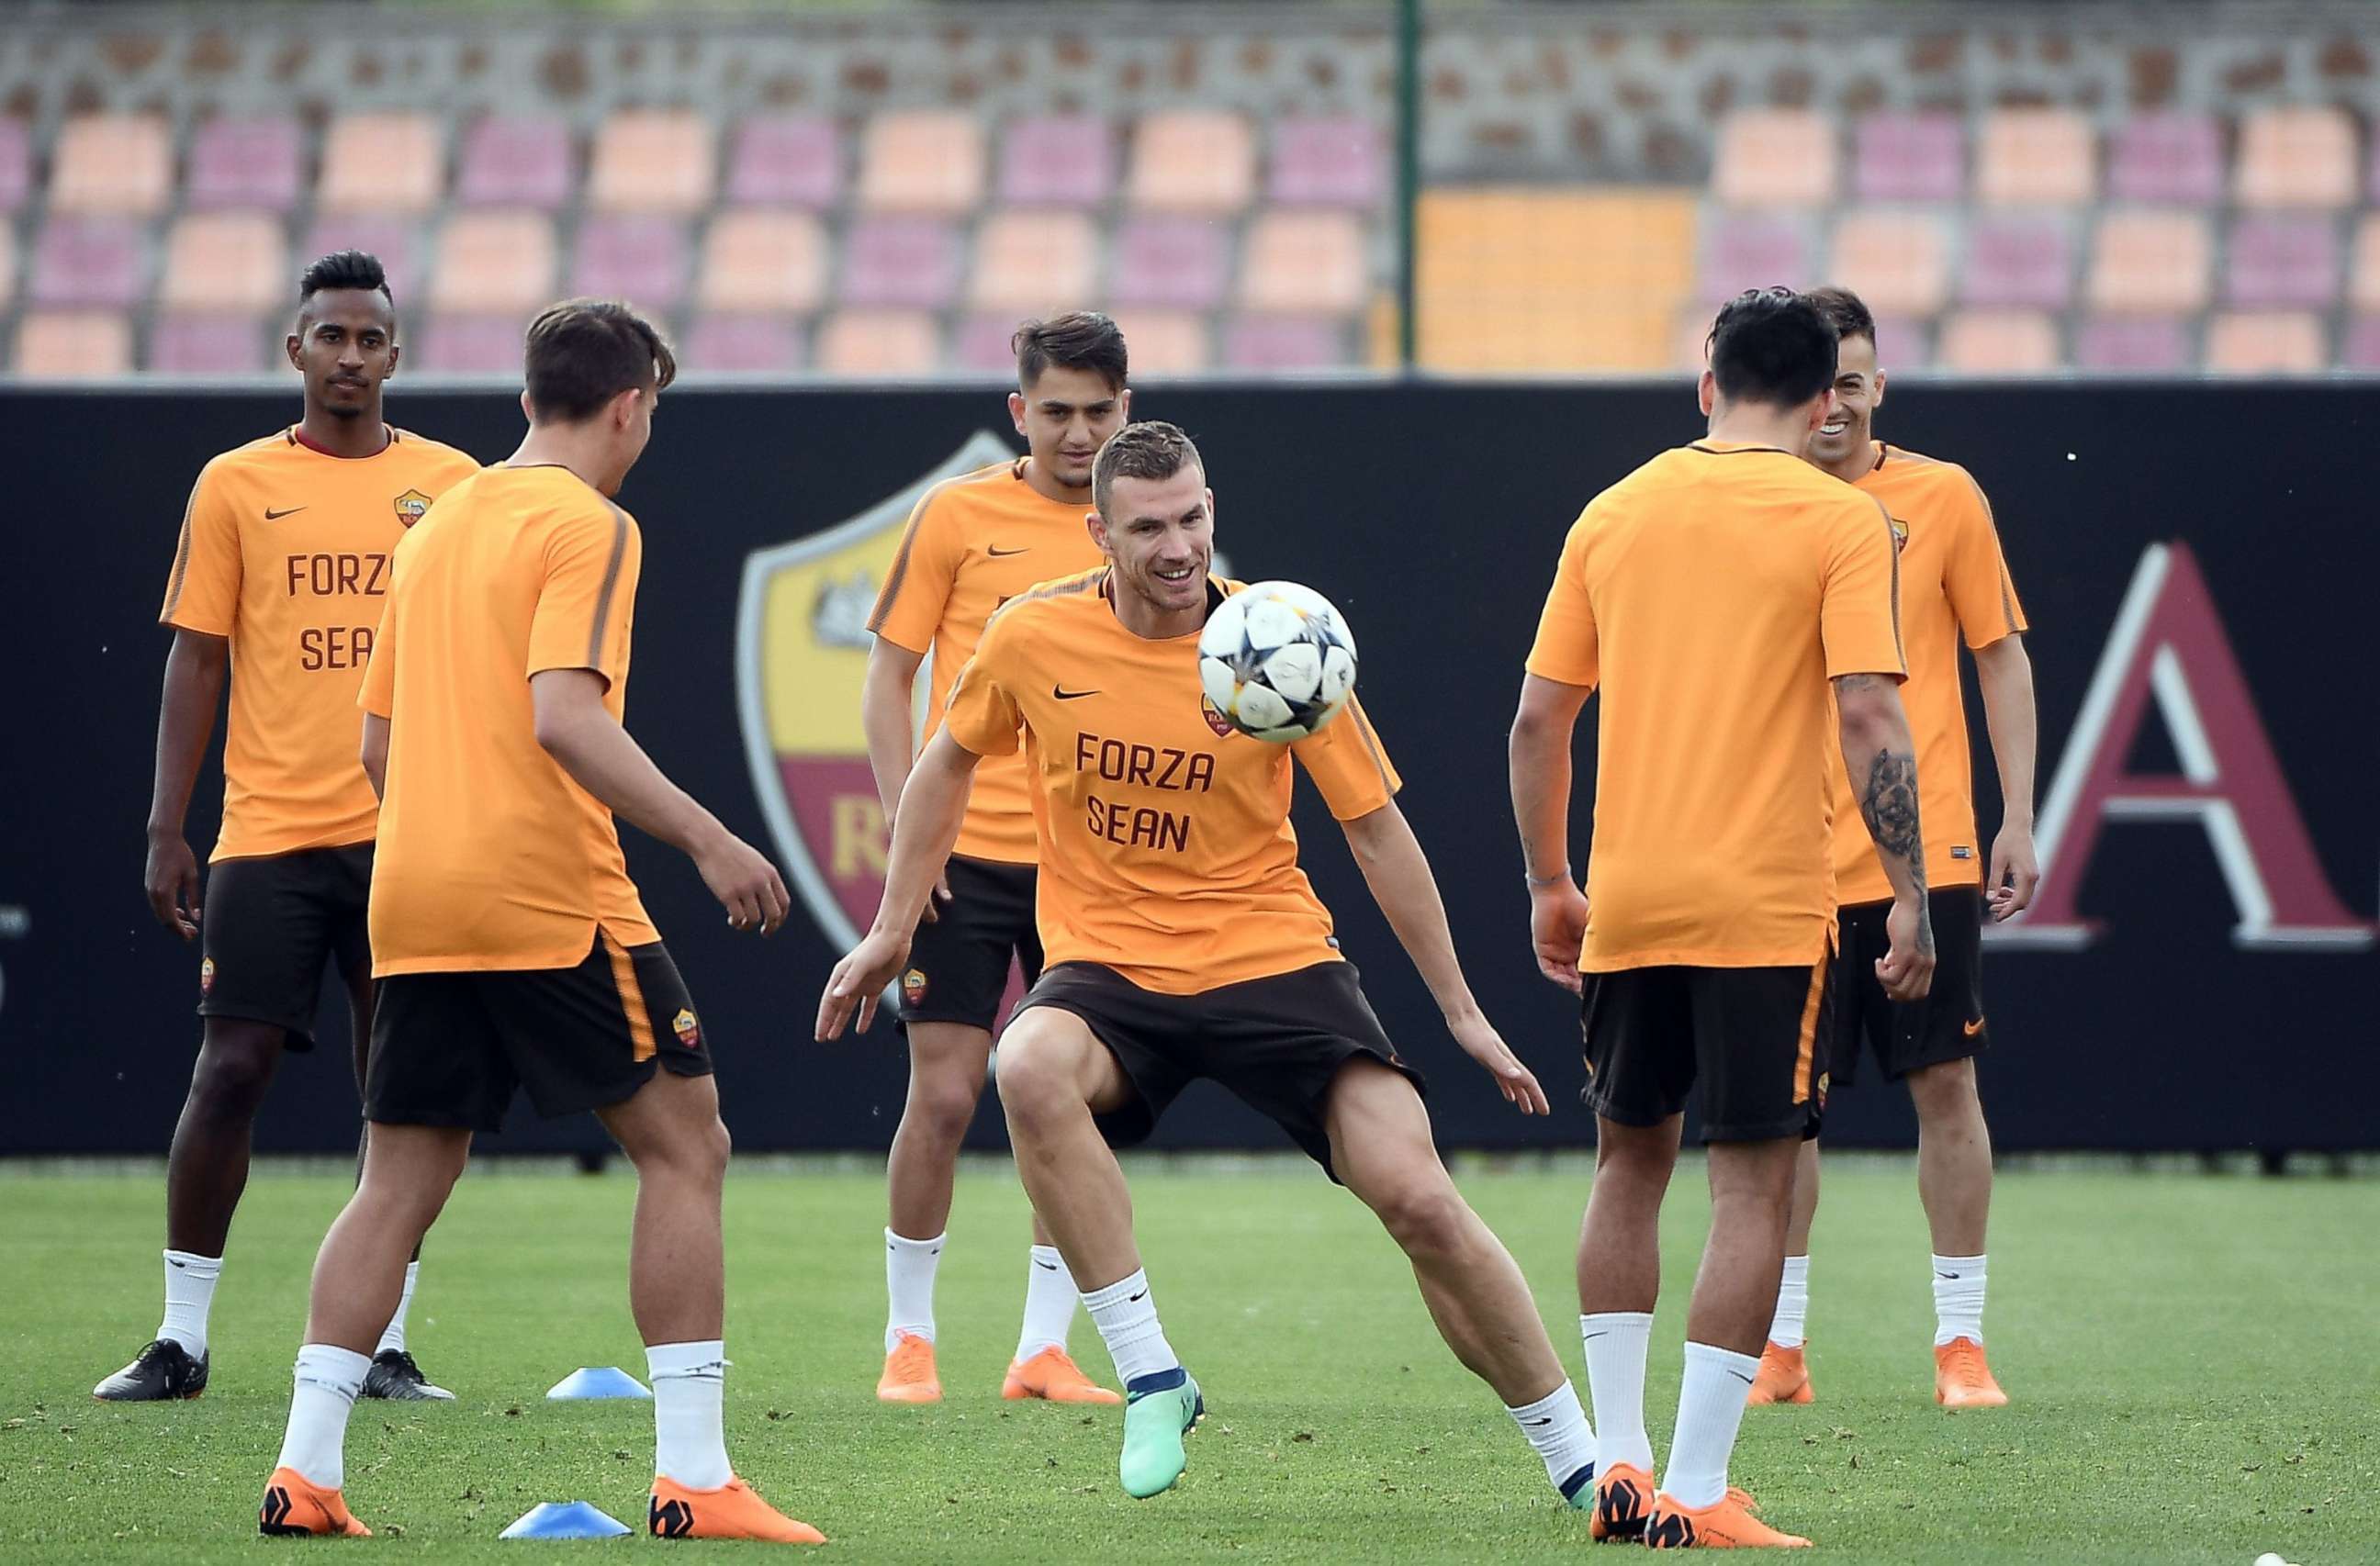 PHOTO: Roma's forward from Bosnia and Herzegovina Edin Dzeko (C) plays the ball during a training session at Roma training ground in Trigoria, May 1, 2018, a day before their Champions League second leg semi-final football match against Liverpool.